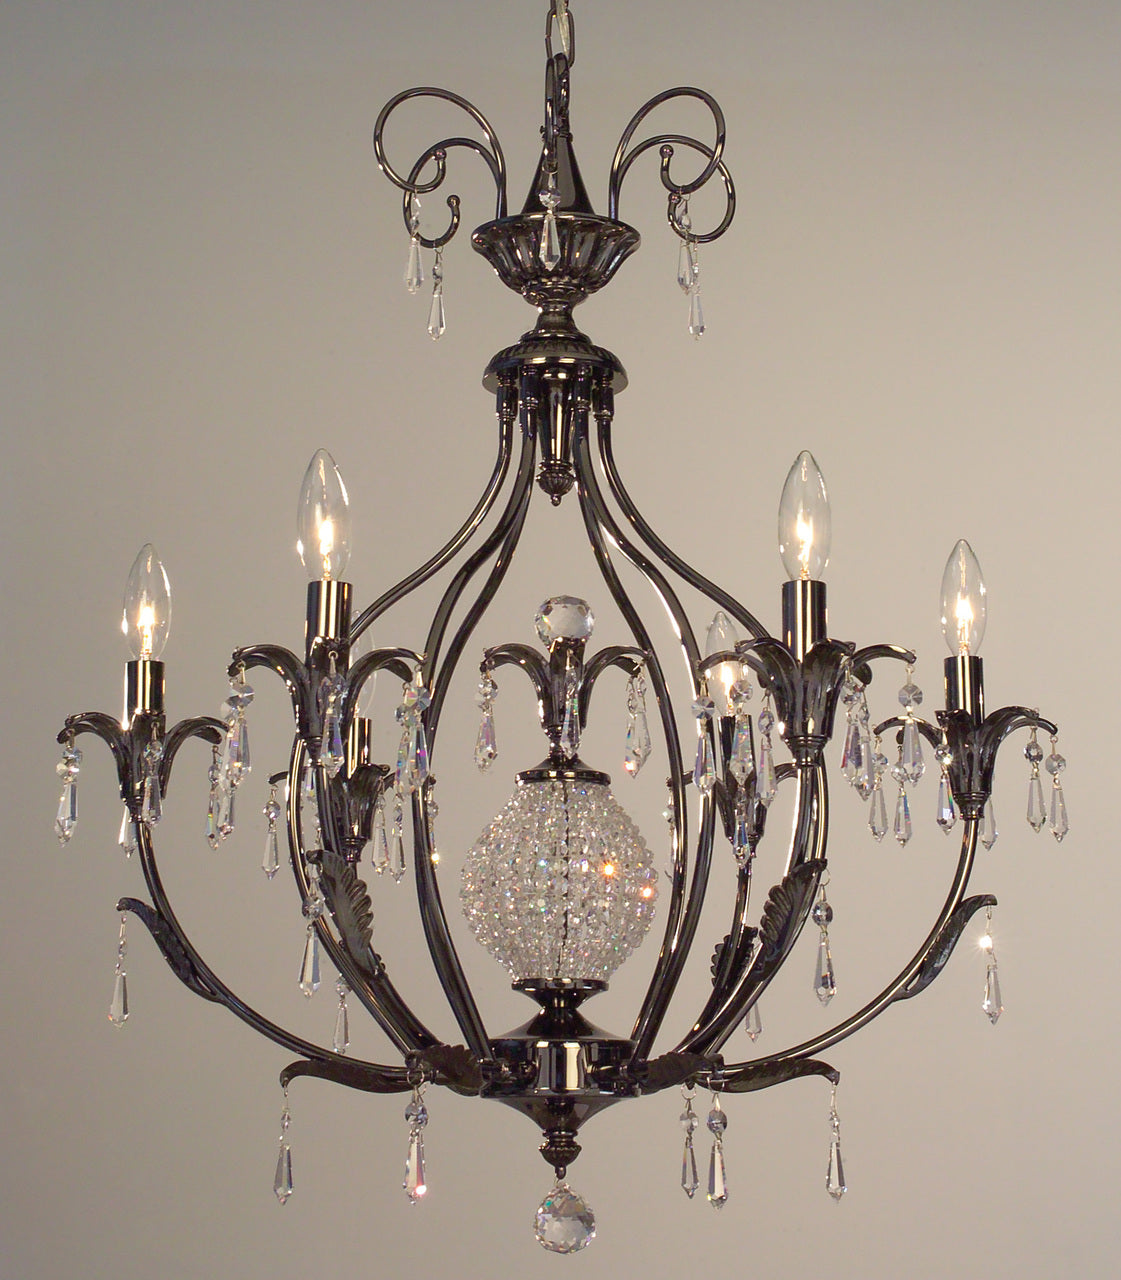 Classic Lighting 16118 ABR SC Sharon Crystal Chandelier in Antique Brass